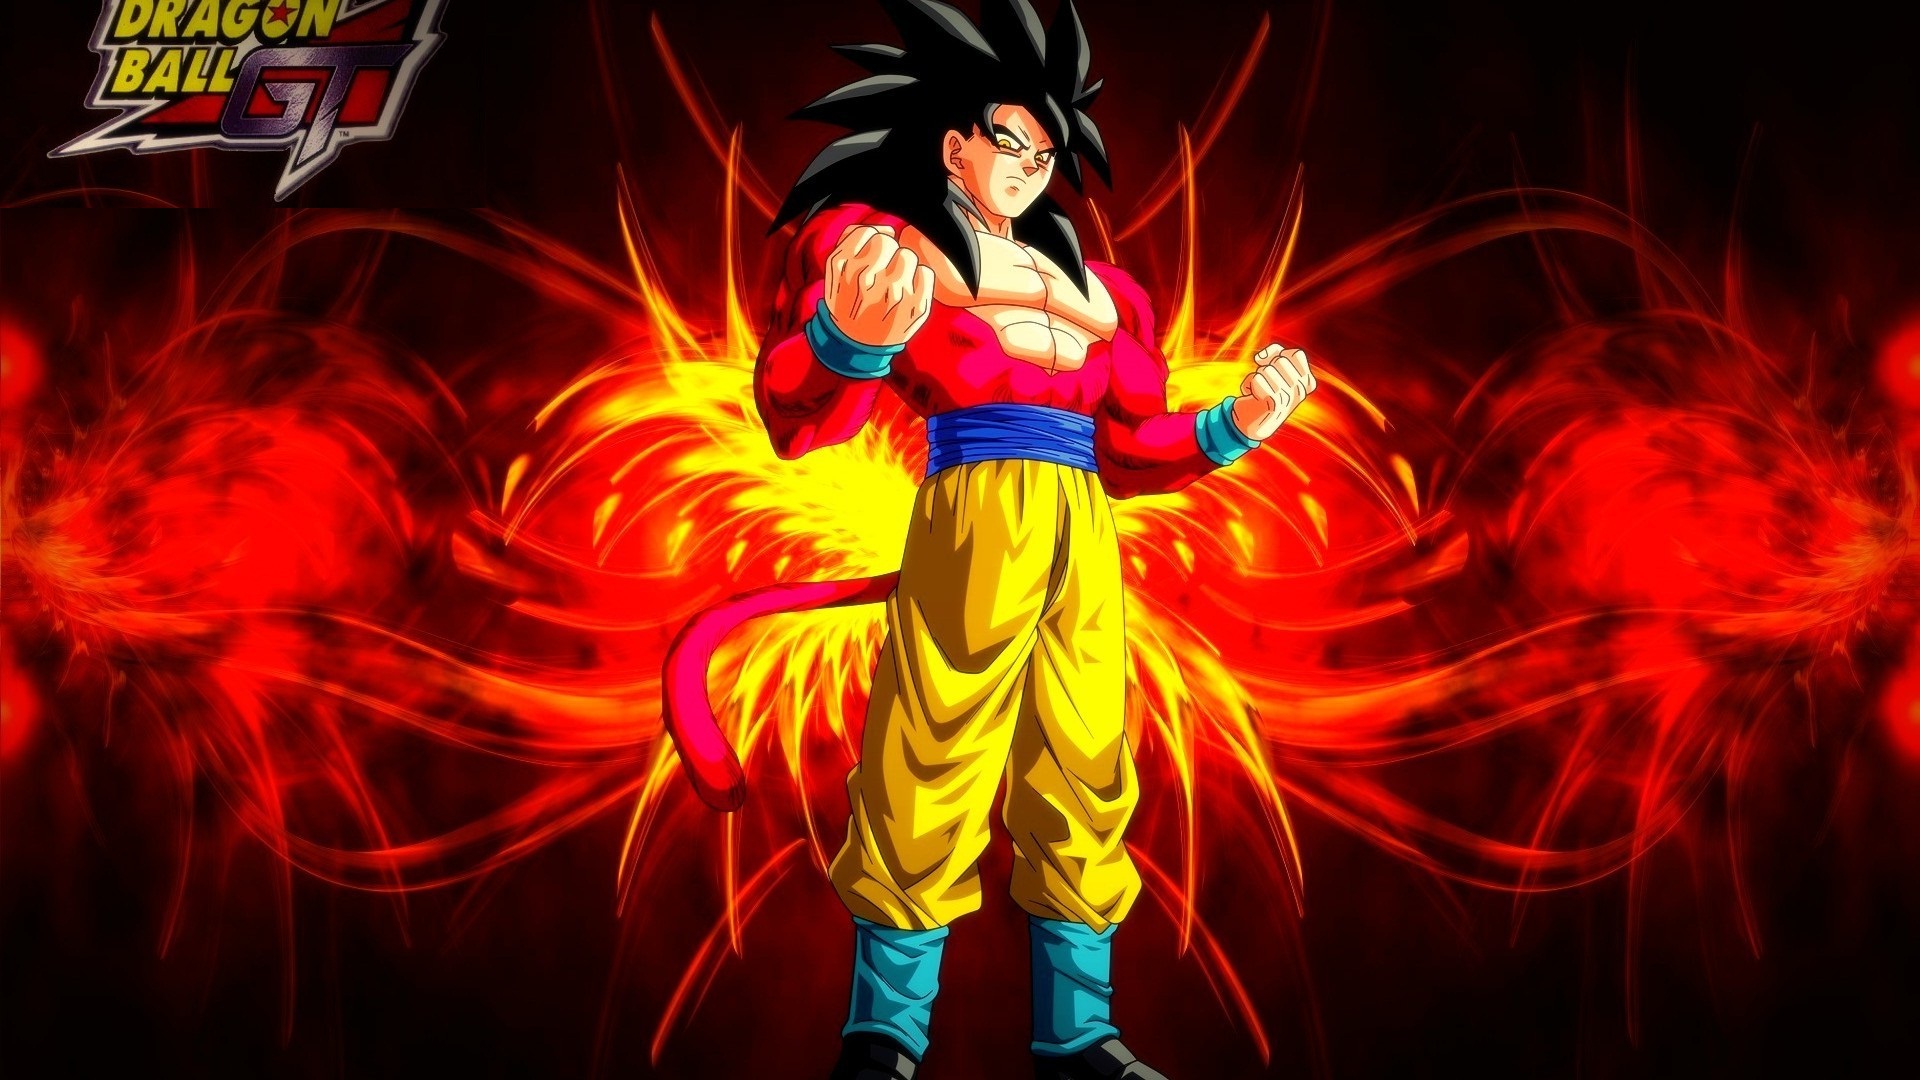 Goku SSJ4 Wallpaper HD with image resolution 1920x1080 pixel. You can make this wallpaper for your Desktop Computer Backgrounds, Mac Wallpapers, Android Lock screen or iPhone Screensavers